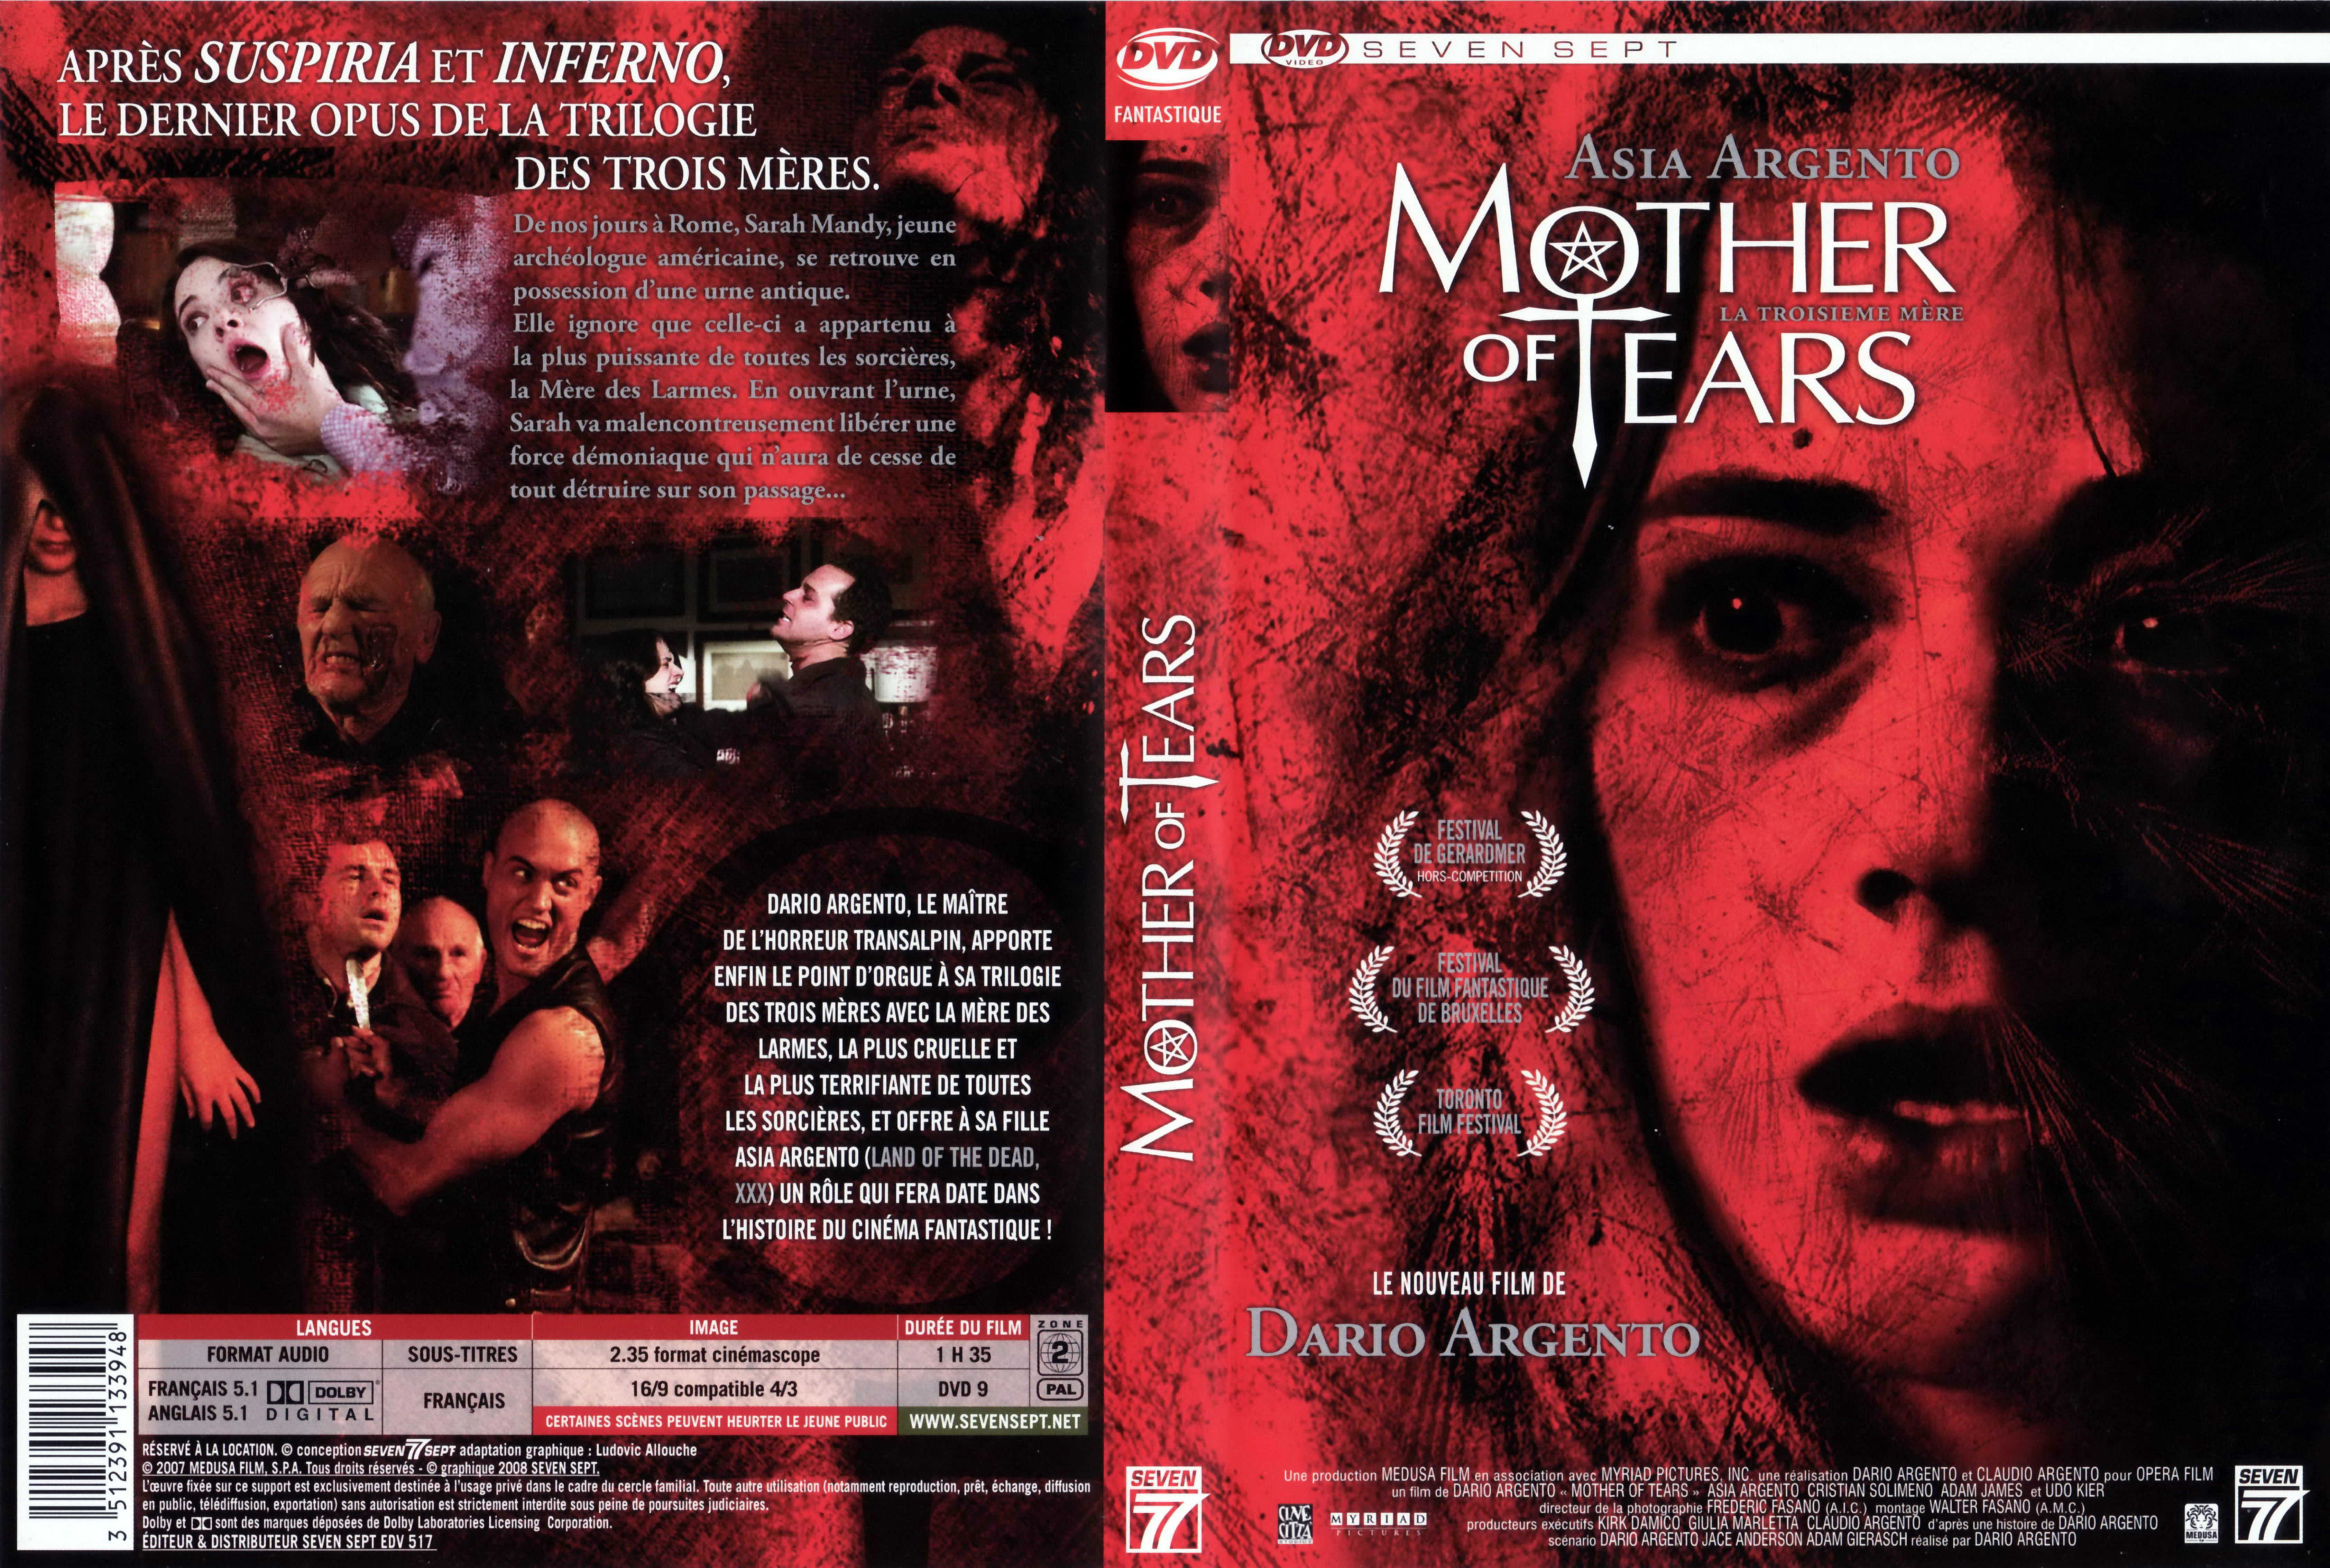 Jaquette DVD Mother of tears